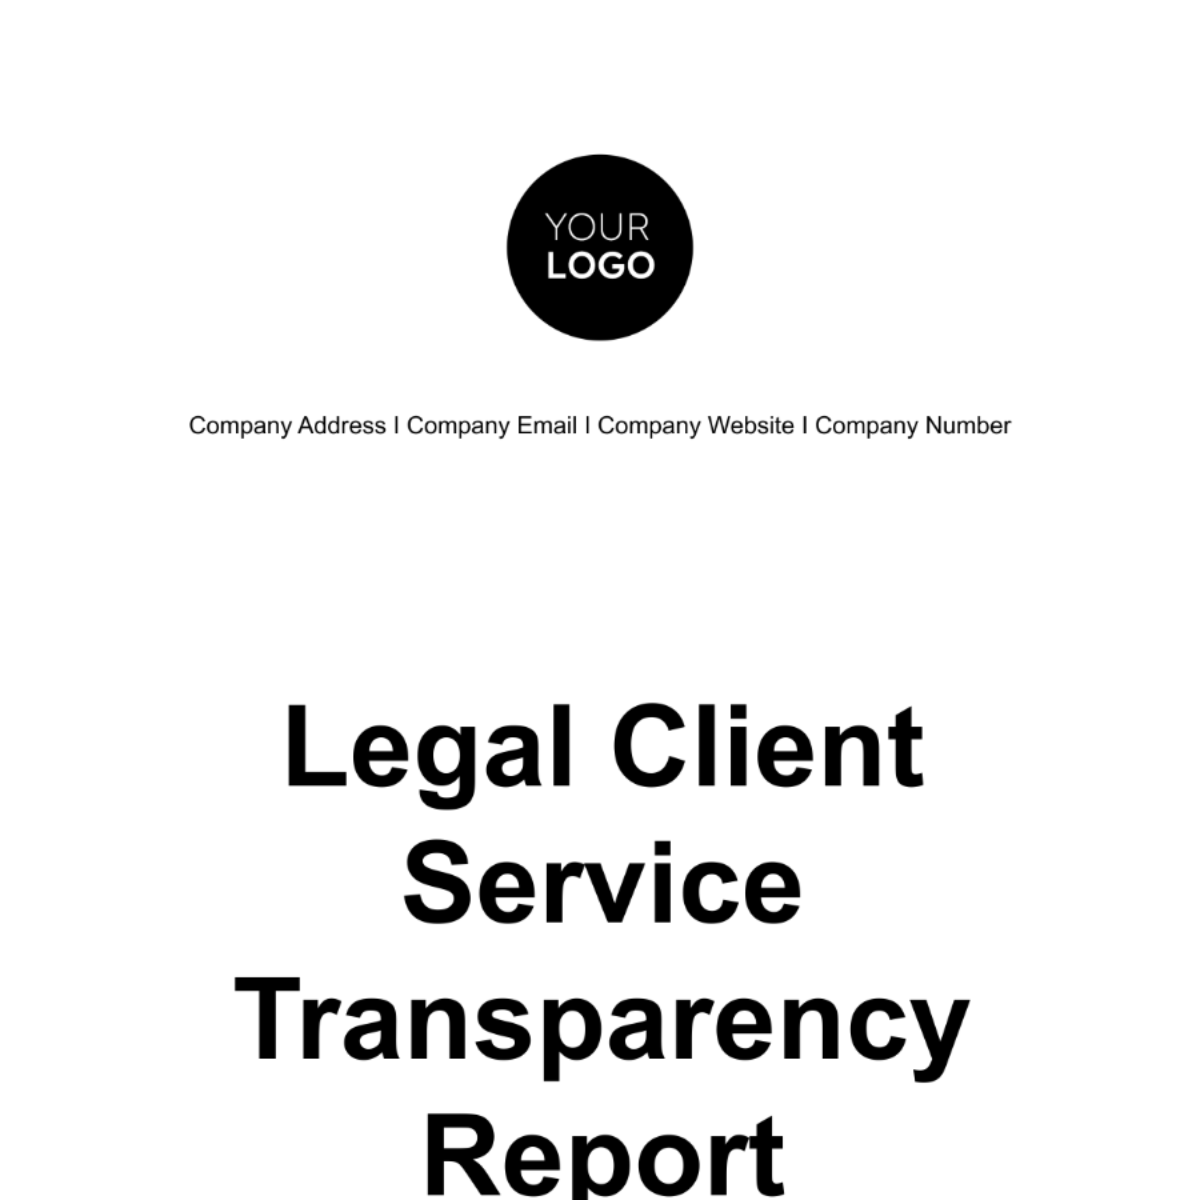 Legal Client Service Transparency Report Template